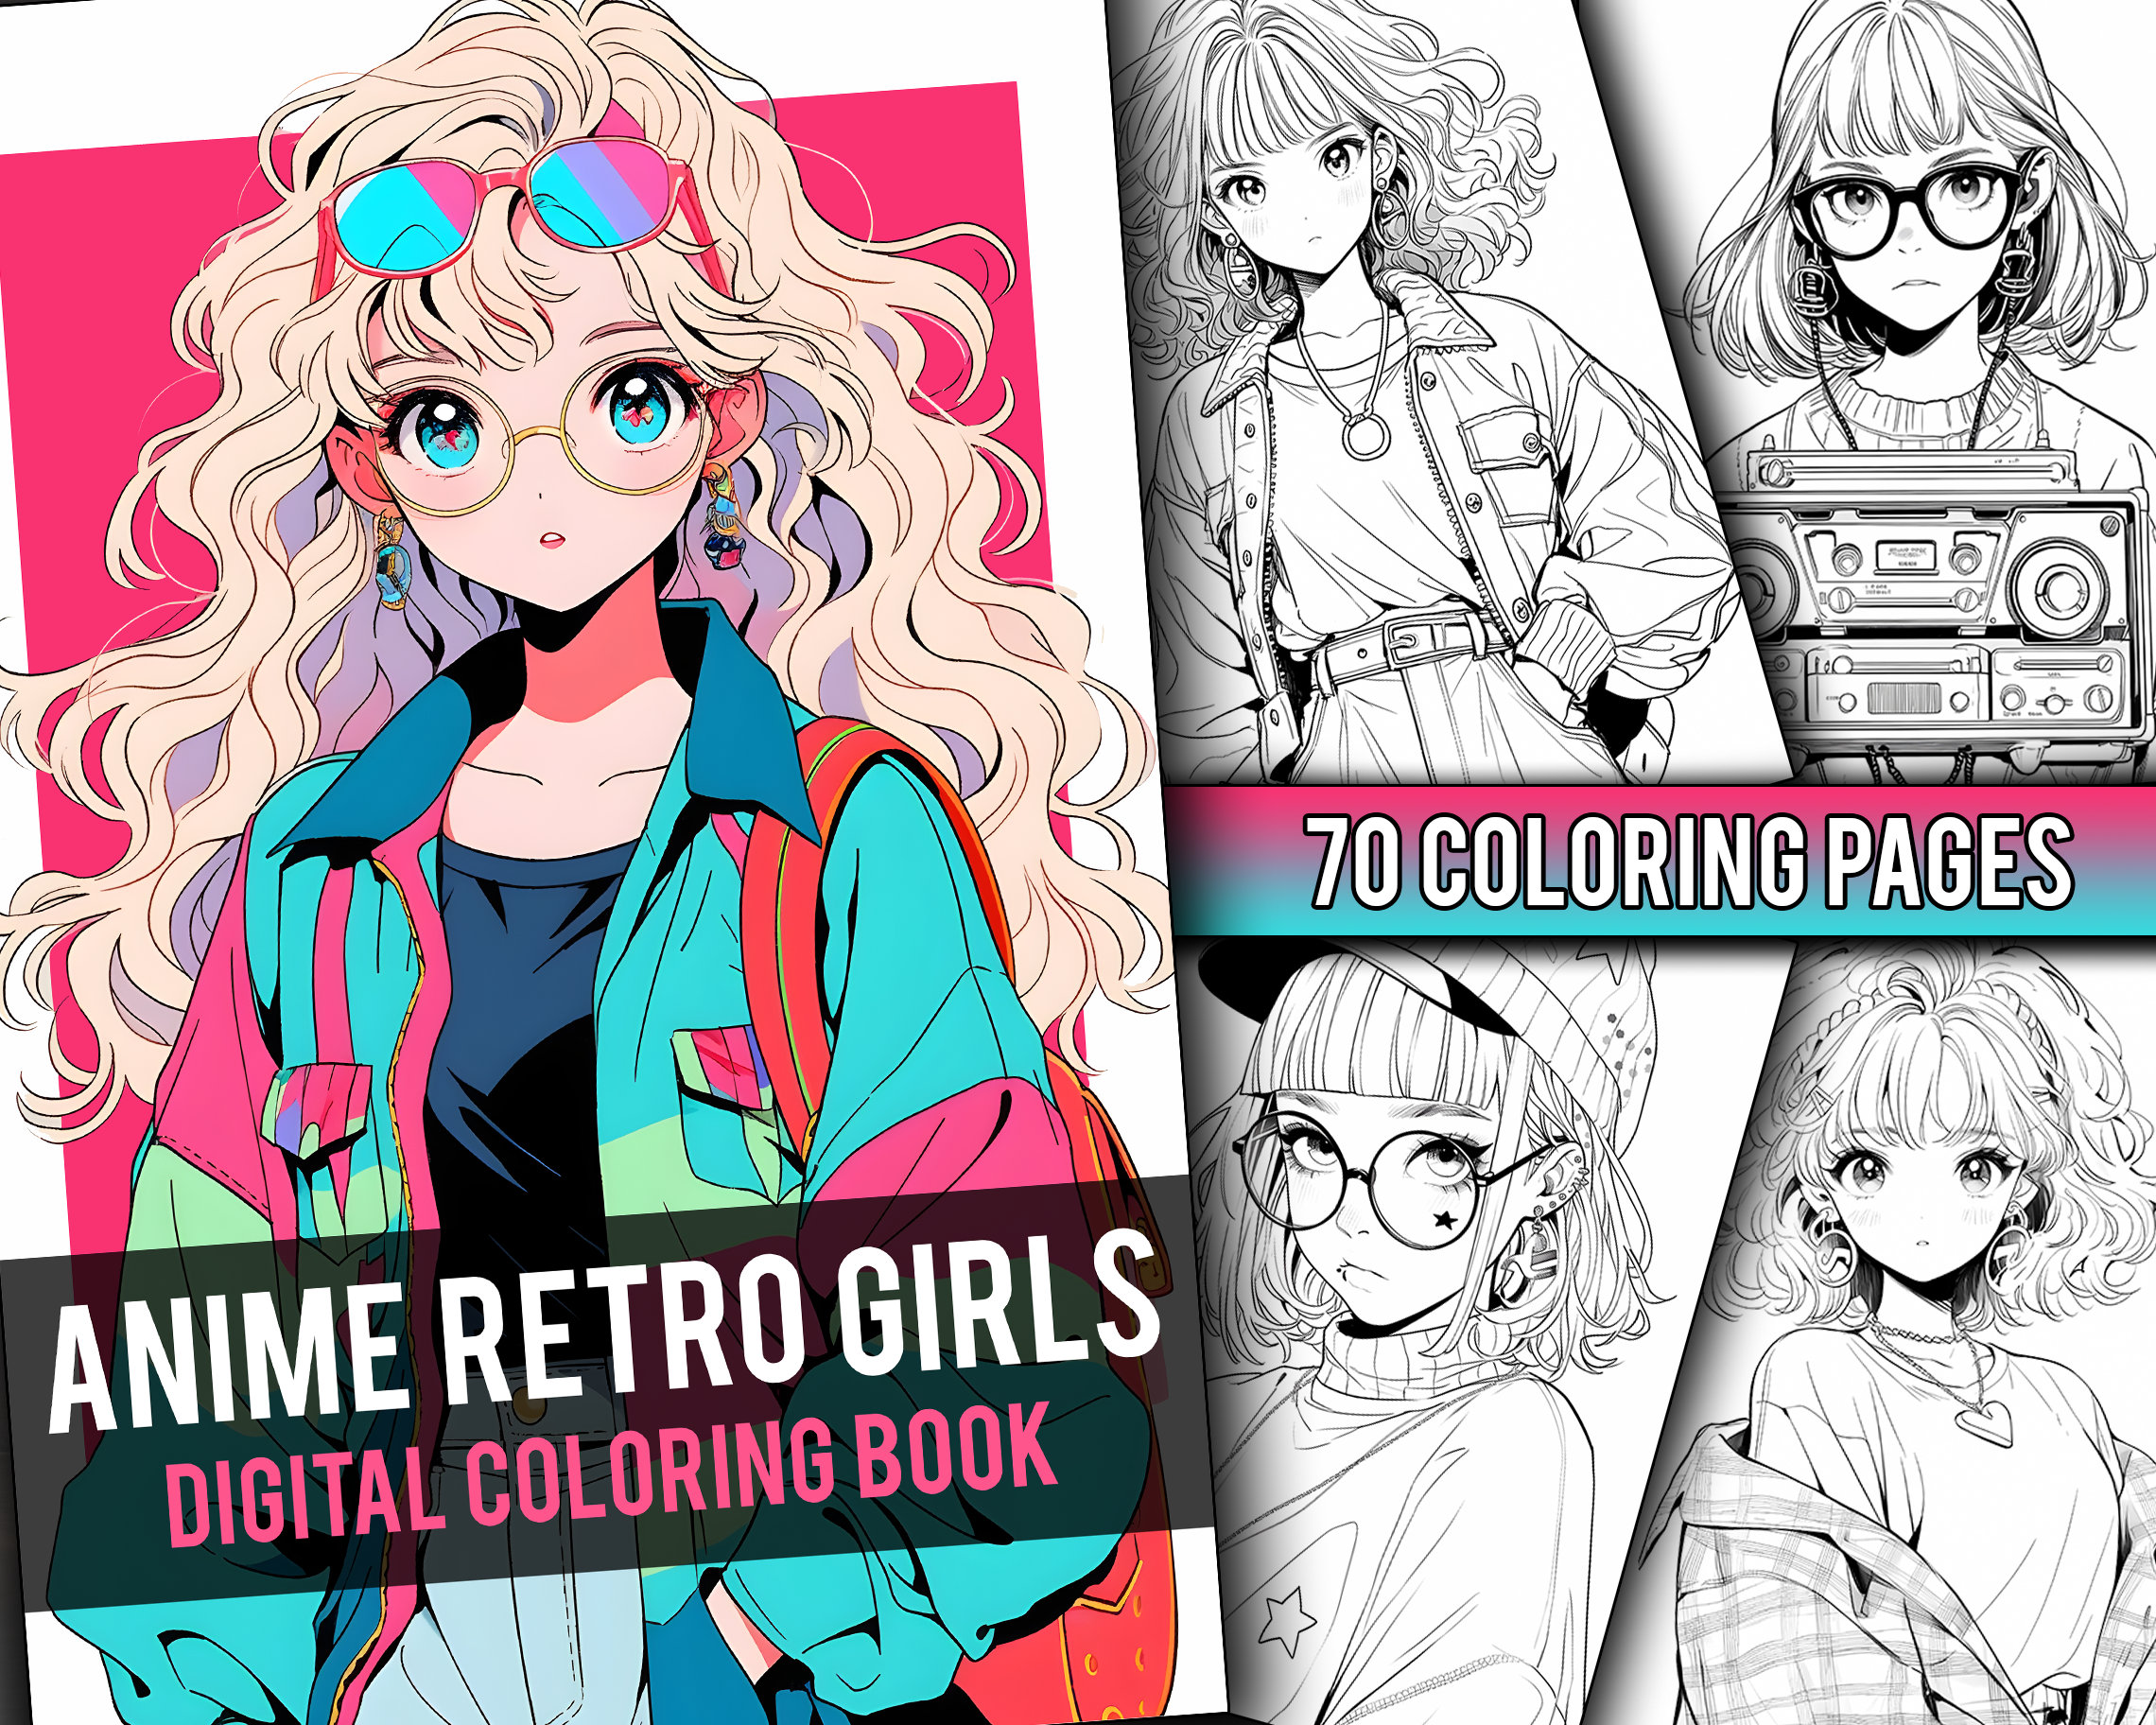 Anime retro girls coloring book page manga fantasy anime coloring pages for adults children instant download printable pdf